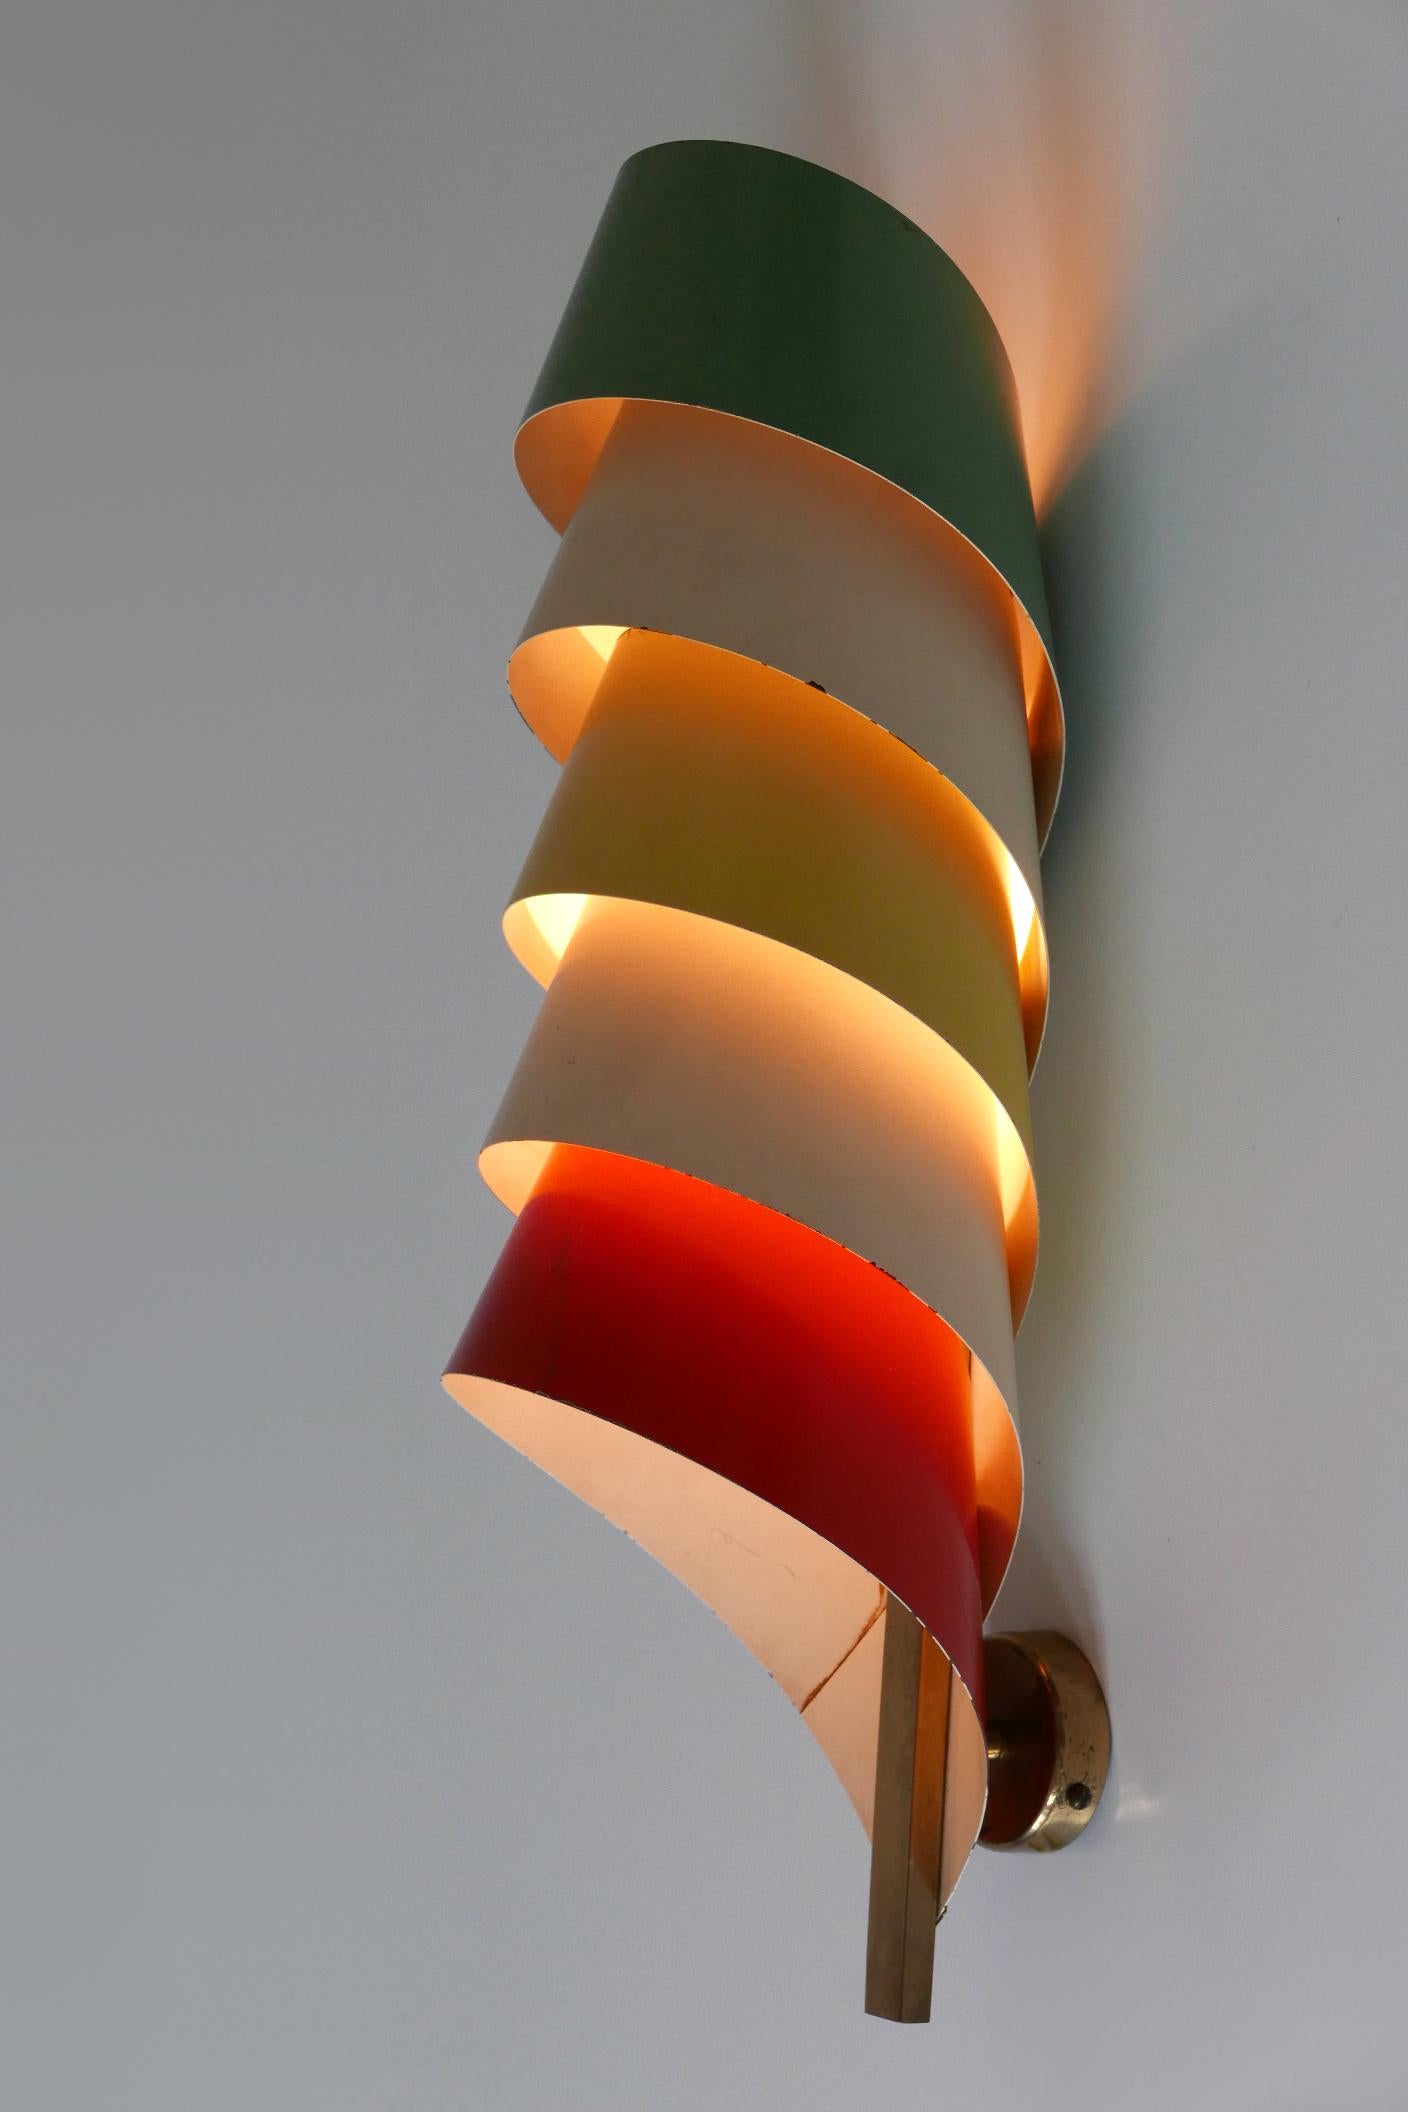 Rare & Decorative Mid-Century Modern Sconce or Wall Lamp Scandinavia 1950s For Sale 9